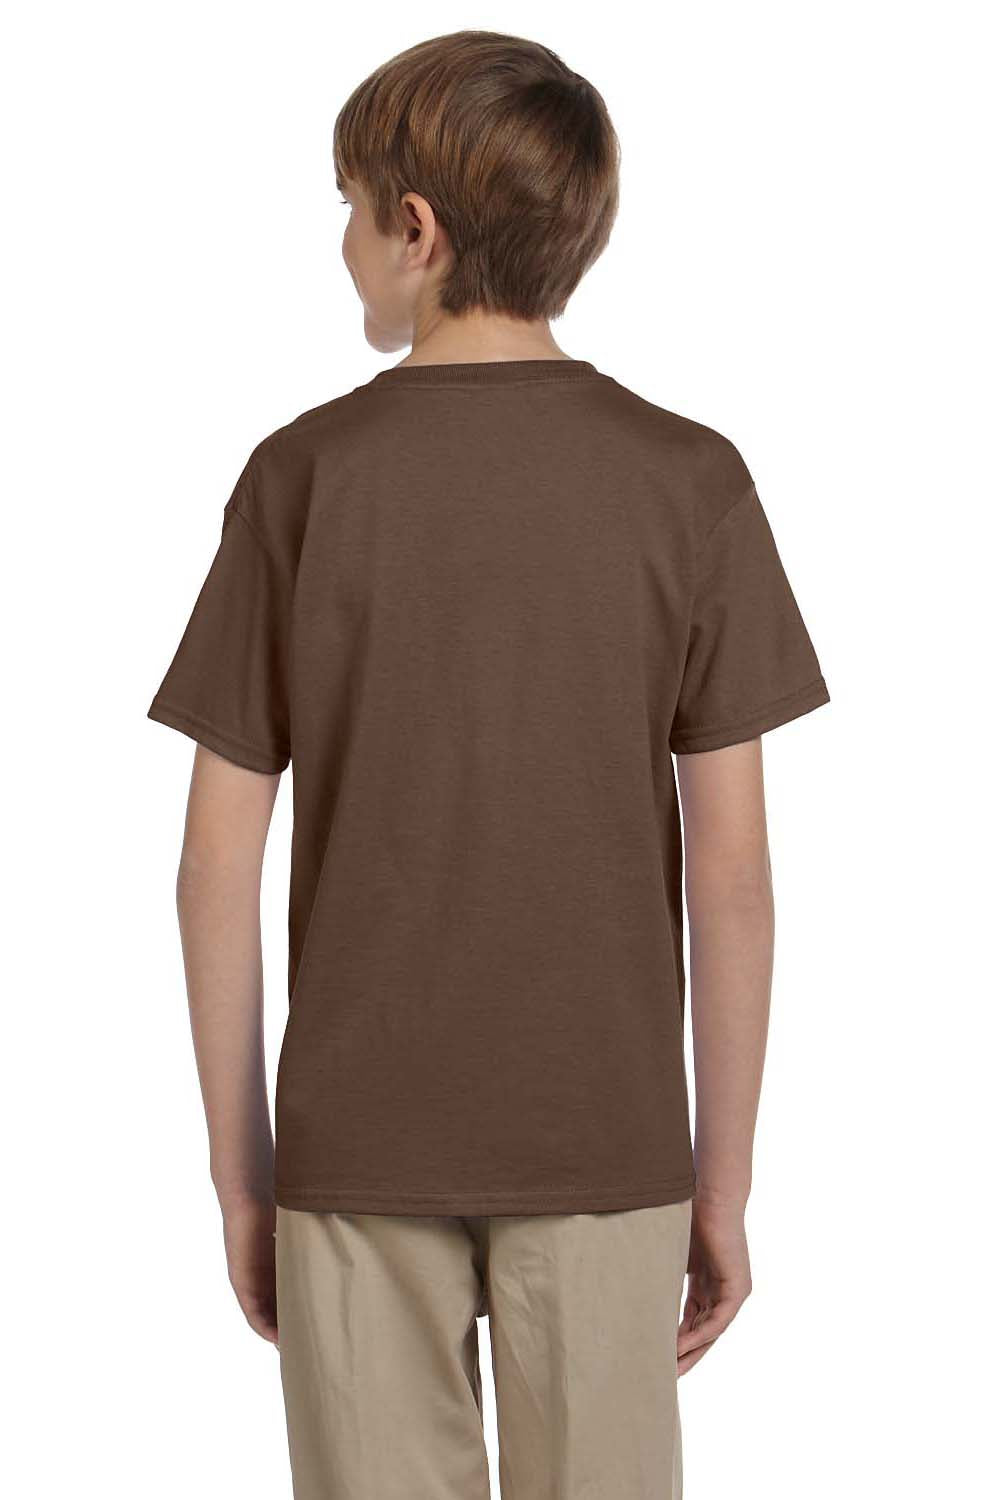 Fruit Of The Loom 3931B Youth HD Jersey Short Sleeve Crewneck T-Shirt Chocolate Brown Back